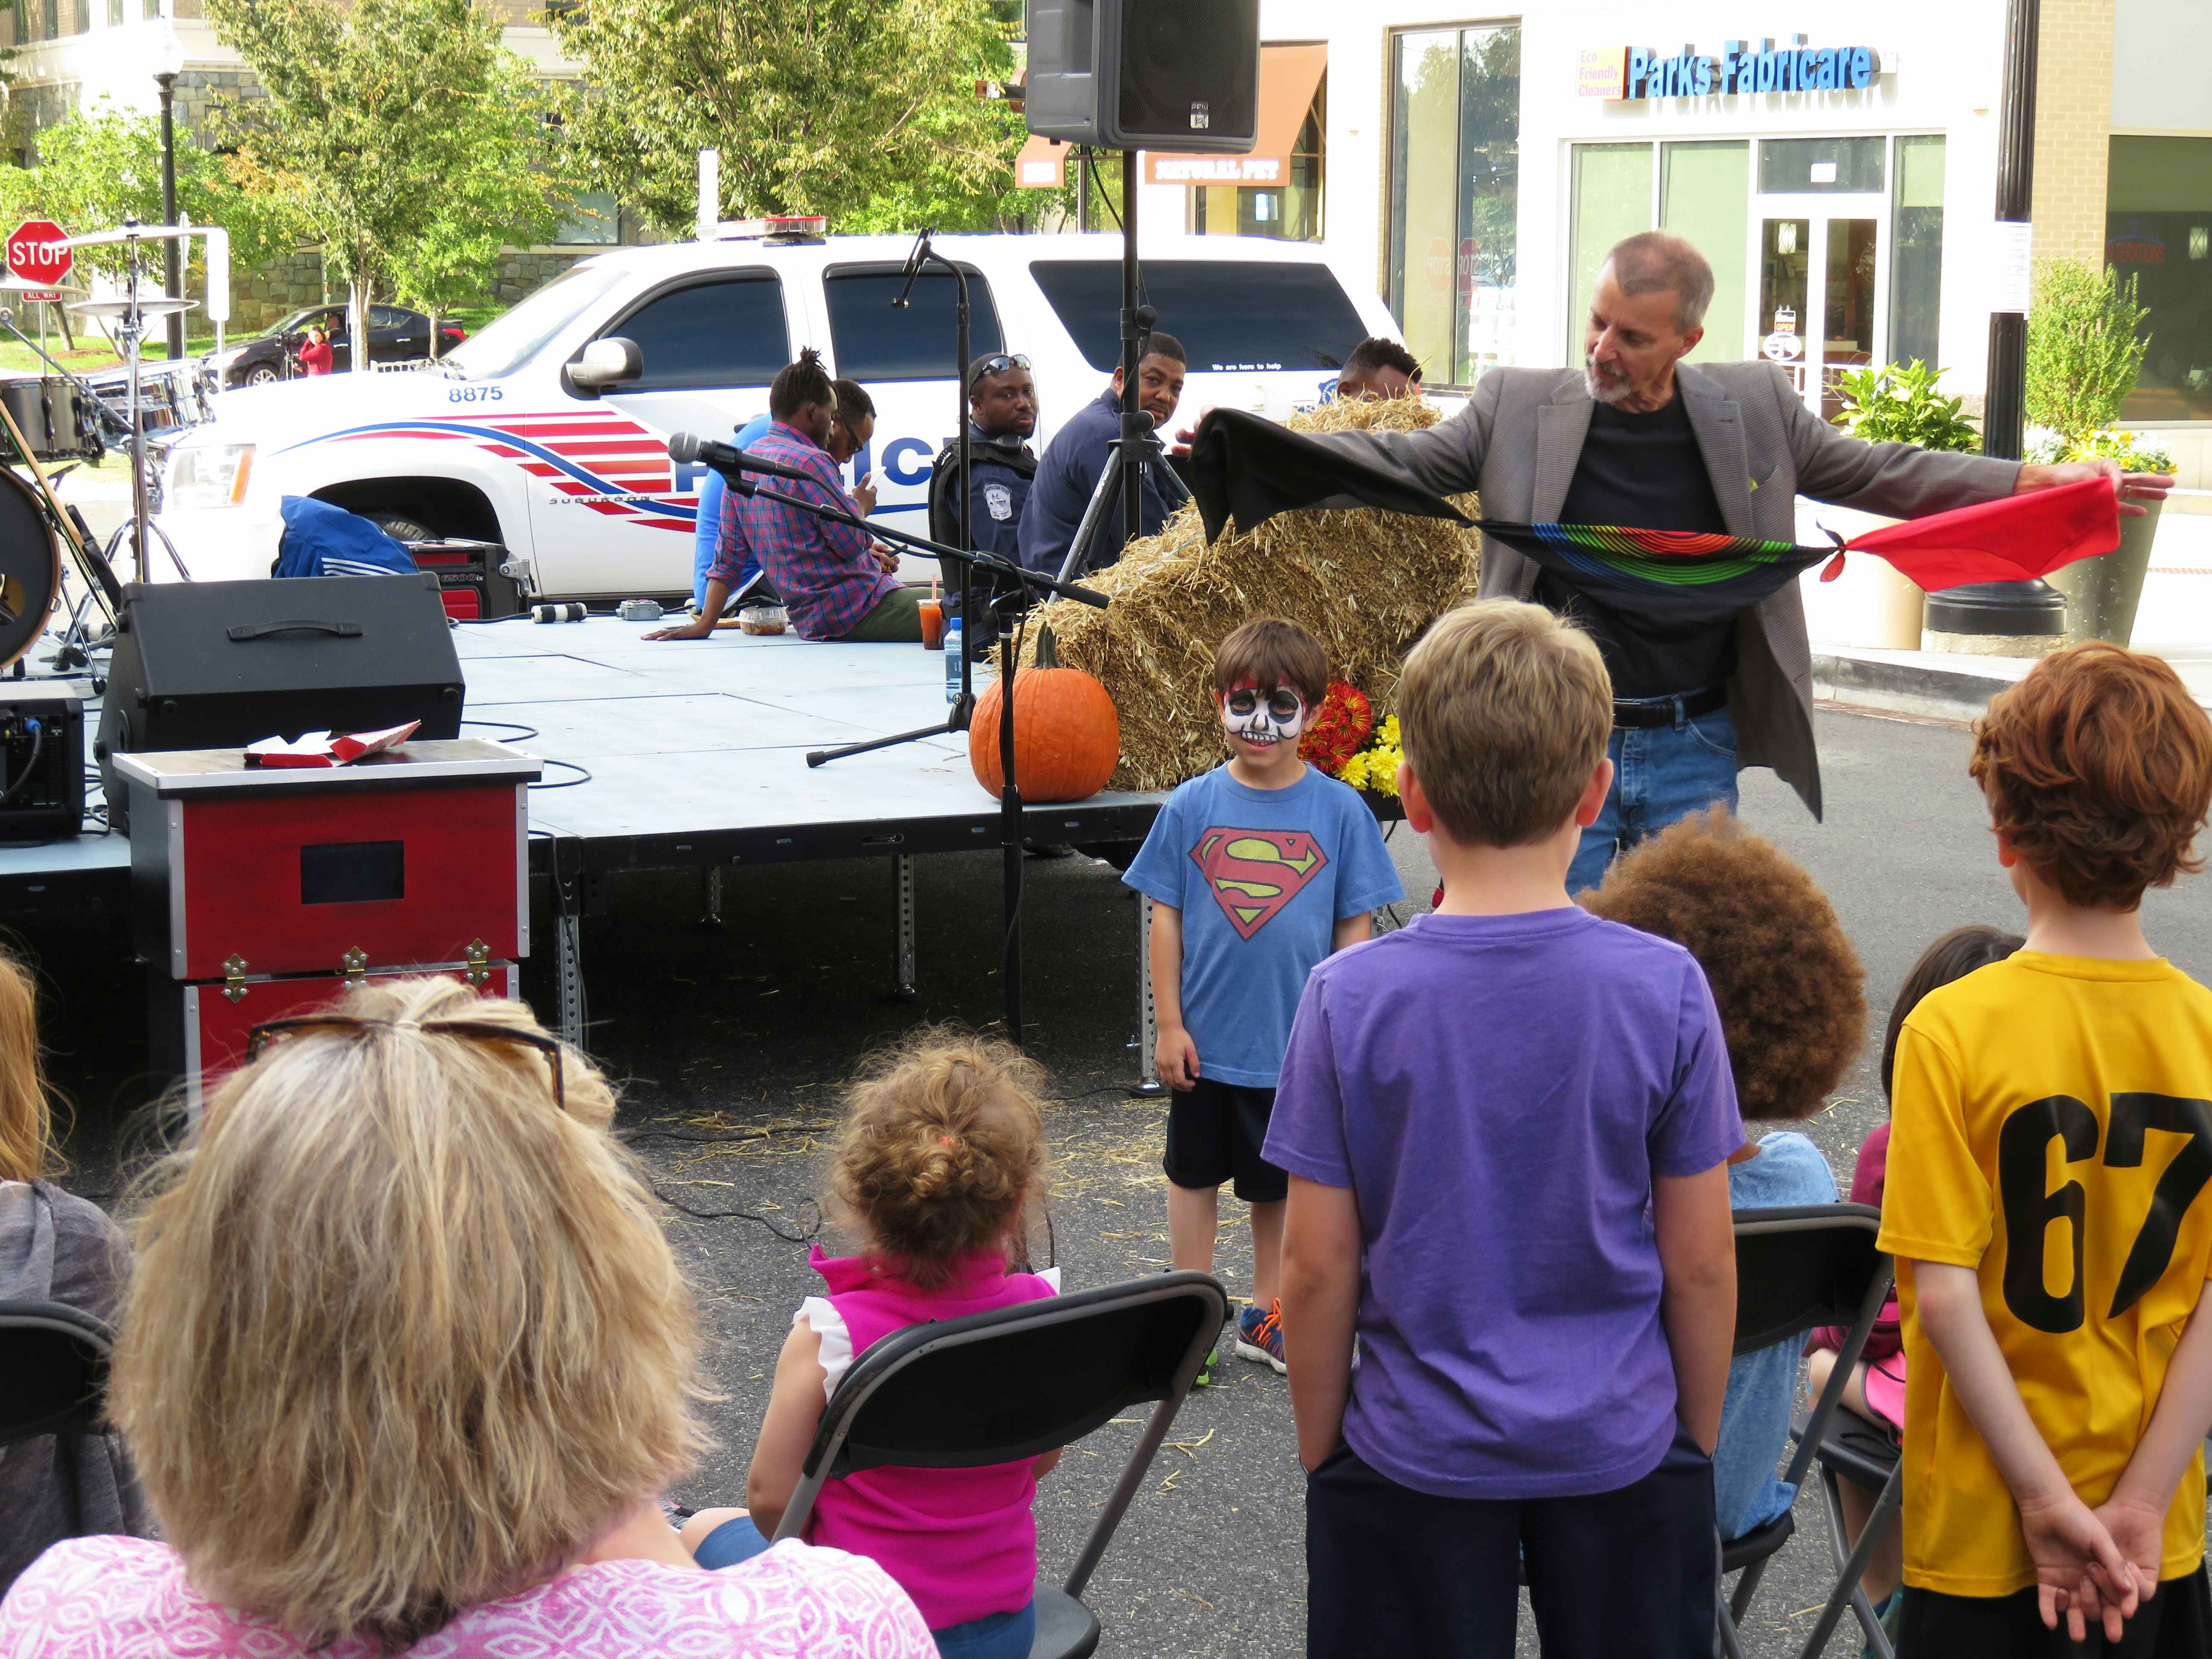 A magician performing a magic trick at a fall festival with children watching.